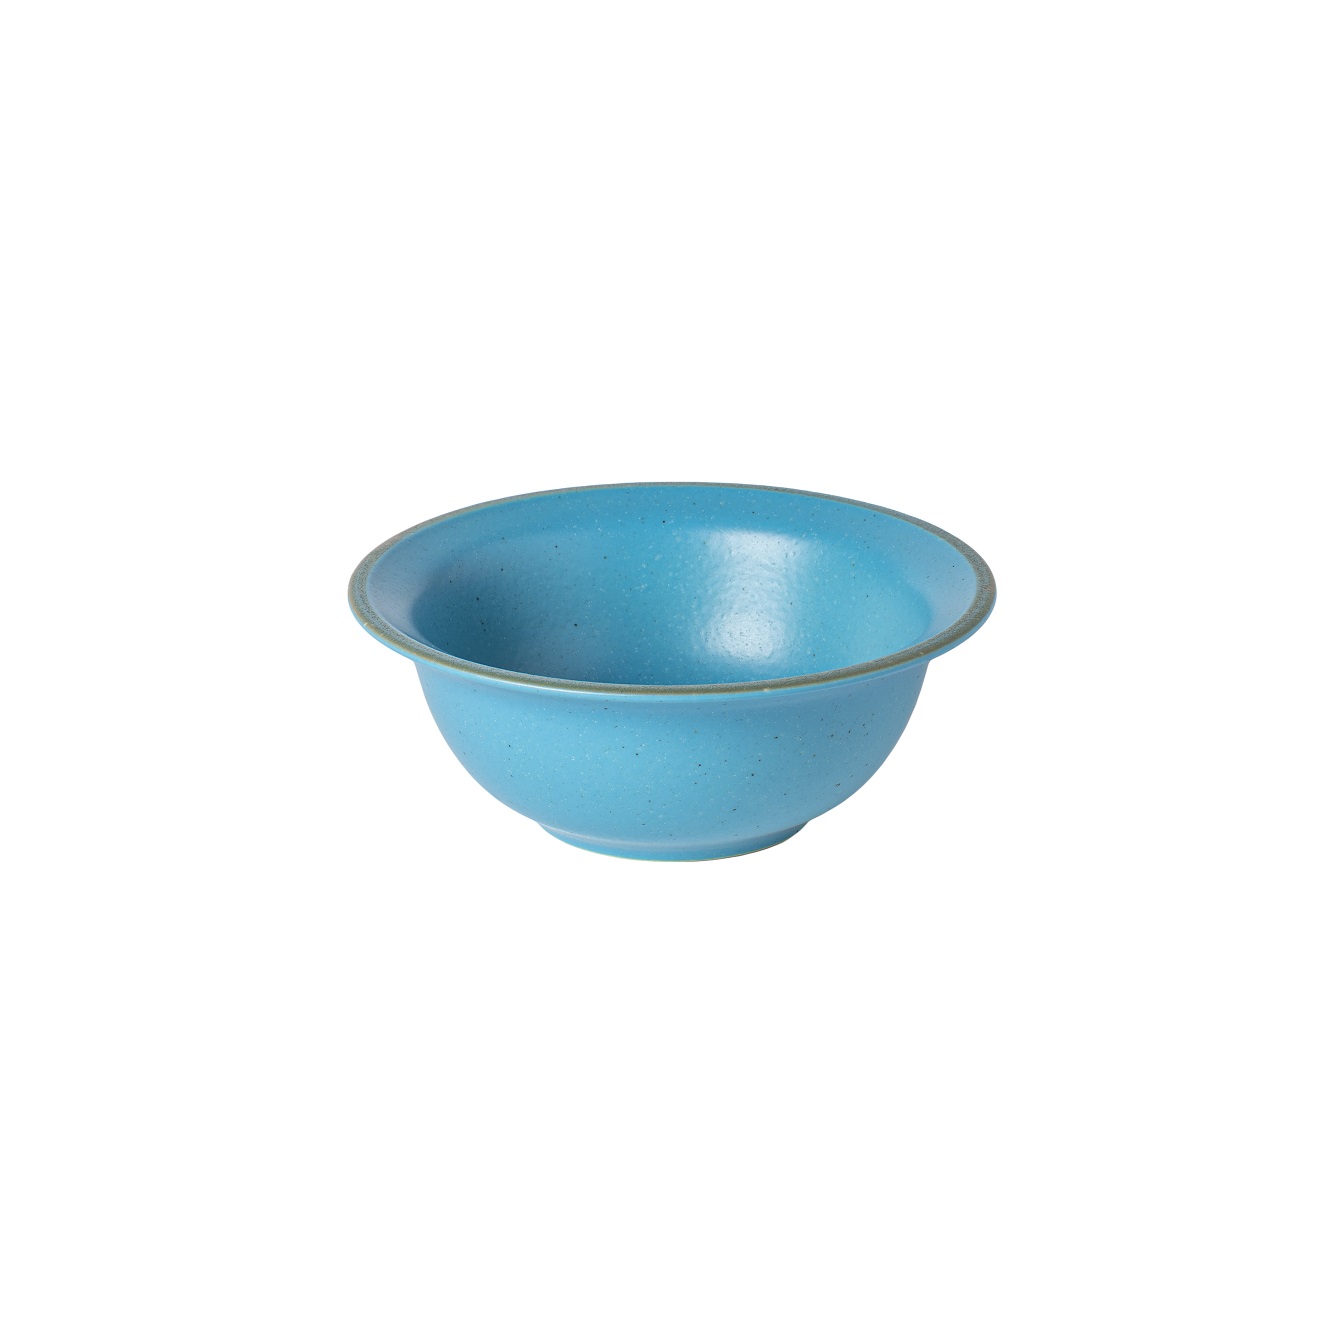 Positano Cyan Soup/cereal Bowl 17cm Gift